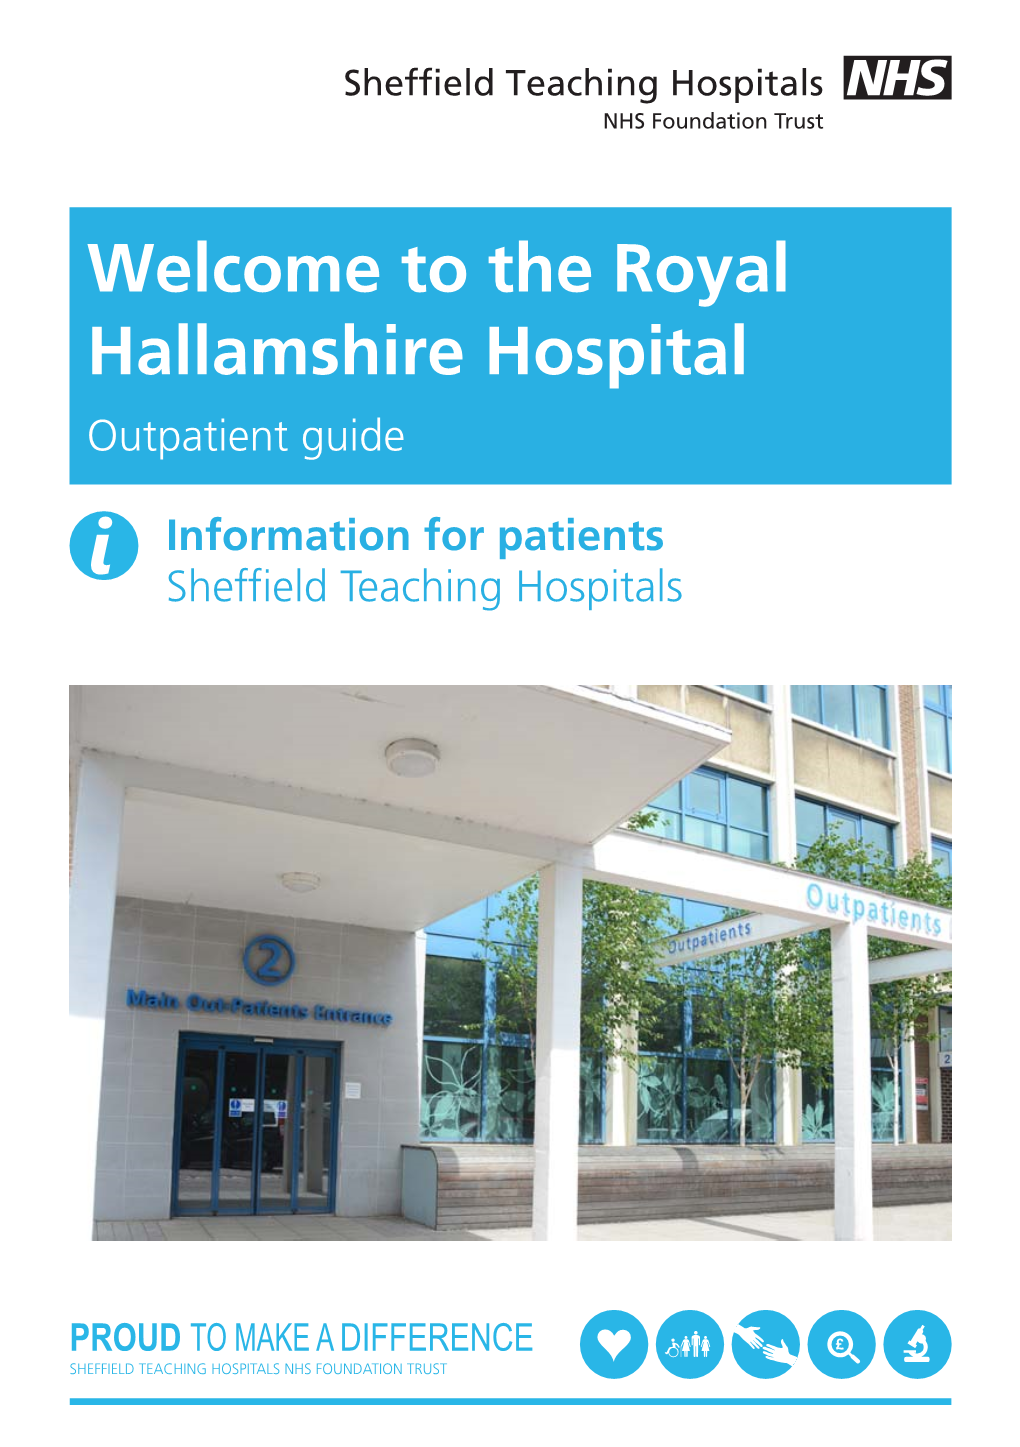 Welcome to the Royal Hallamshire Hospital Outpatient Guide